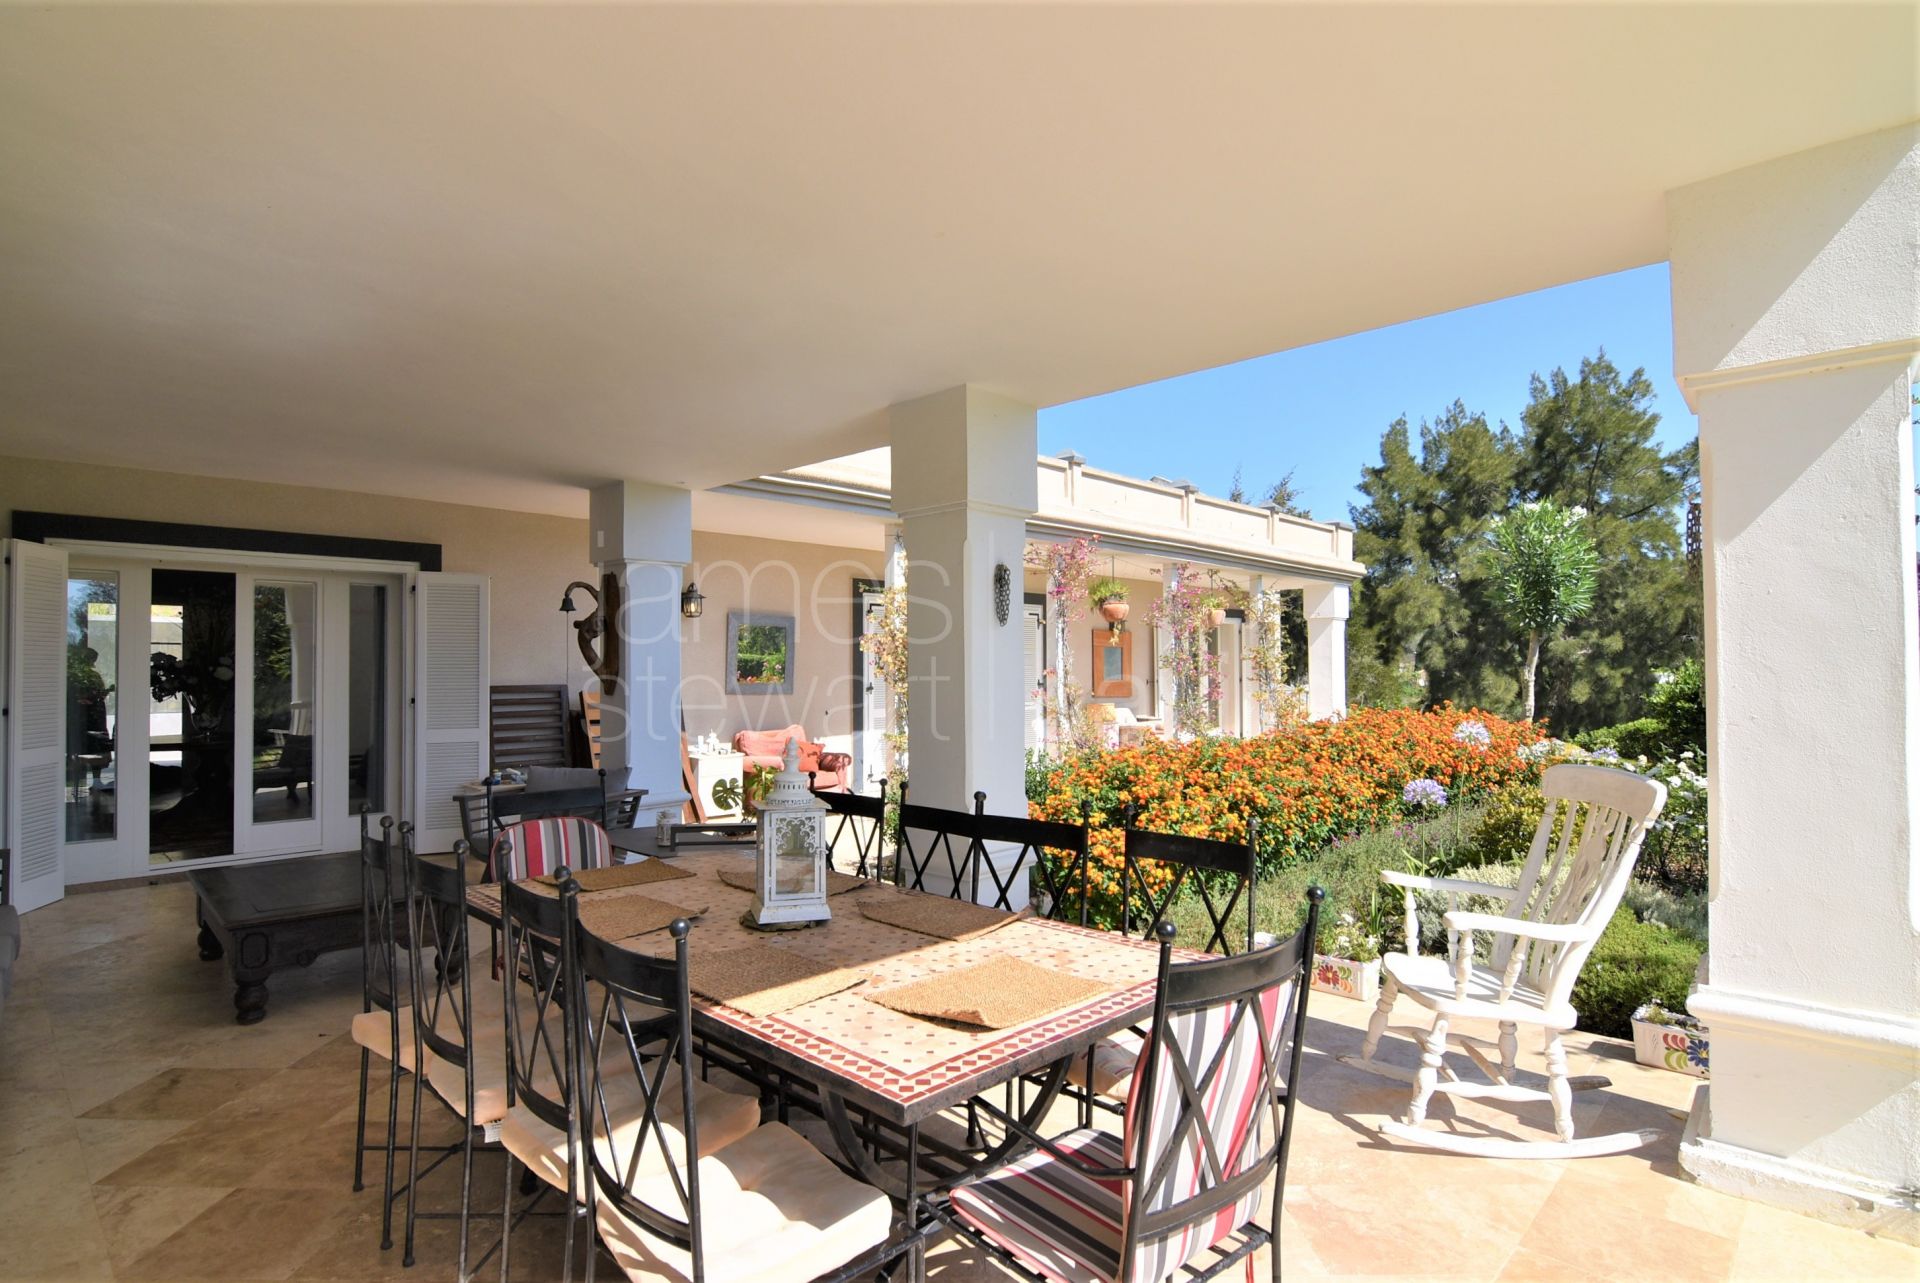 A lovely family home close to Real Valderrama GC with mature gardens and separate apartment